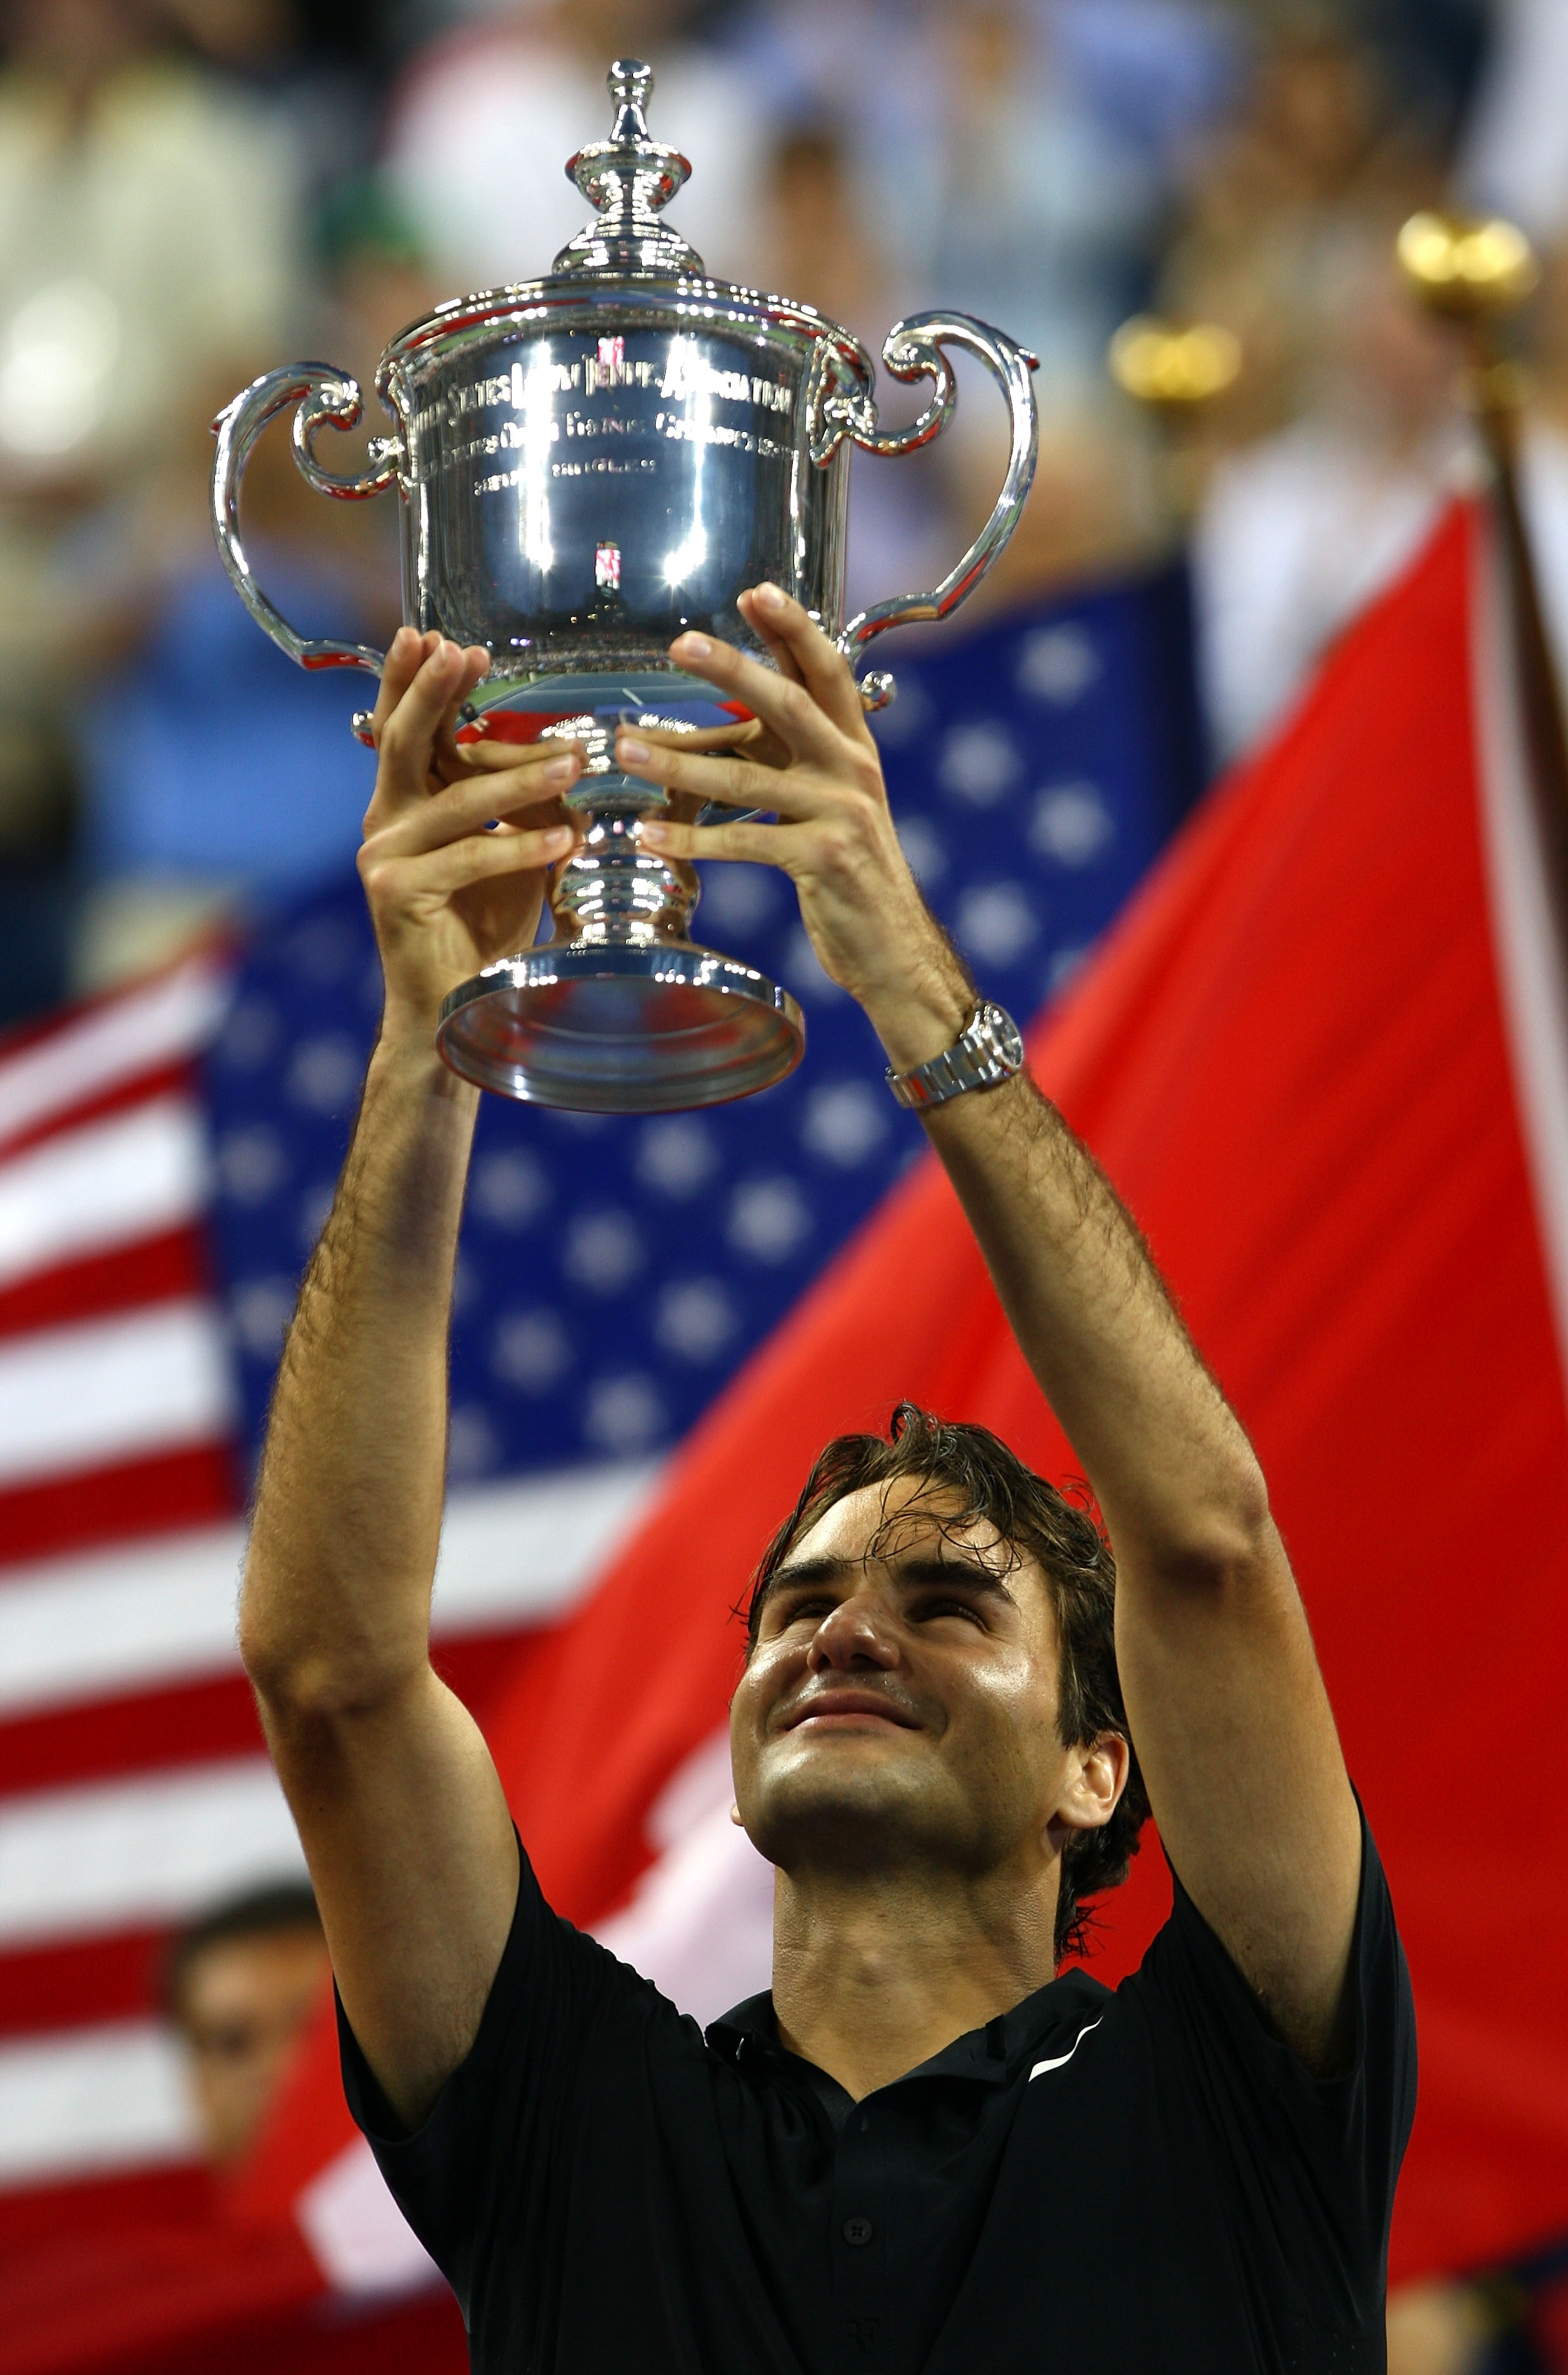 NEW YORK - SEPTEMBER 09:  Roger Federer of Switzerland celebrates with the trophy after defeating Novak Djokovic of Serbia by a score of 7-6(4), 7-6(2), 6-4 to win the Men's Singles Final on day fourteen of the 2007 U.S. Open in Arthur Ashe Stadium at the